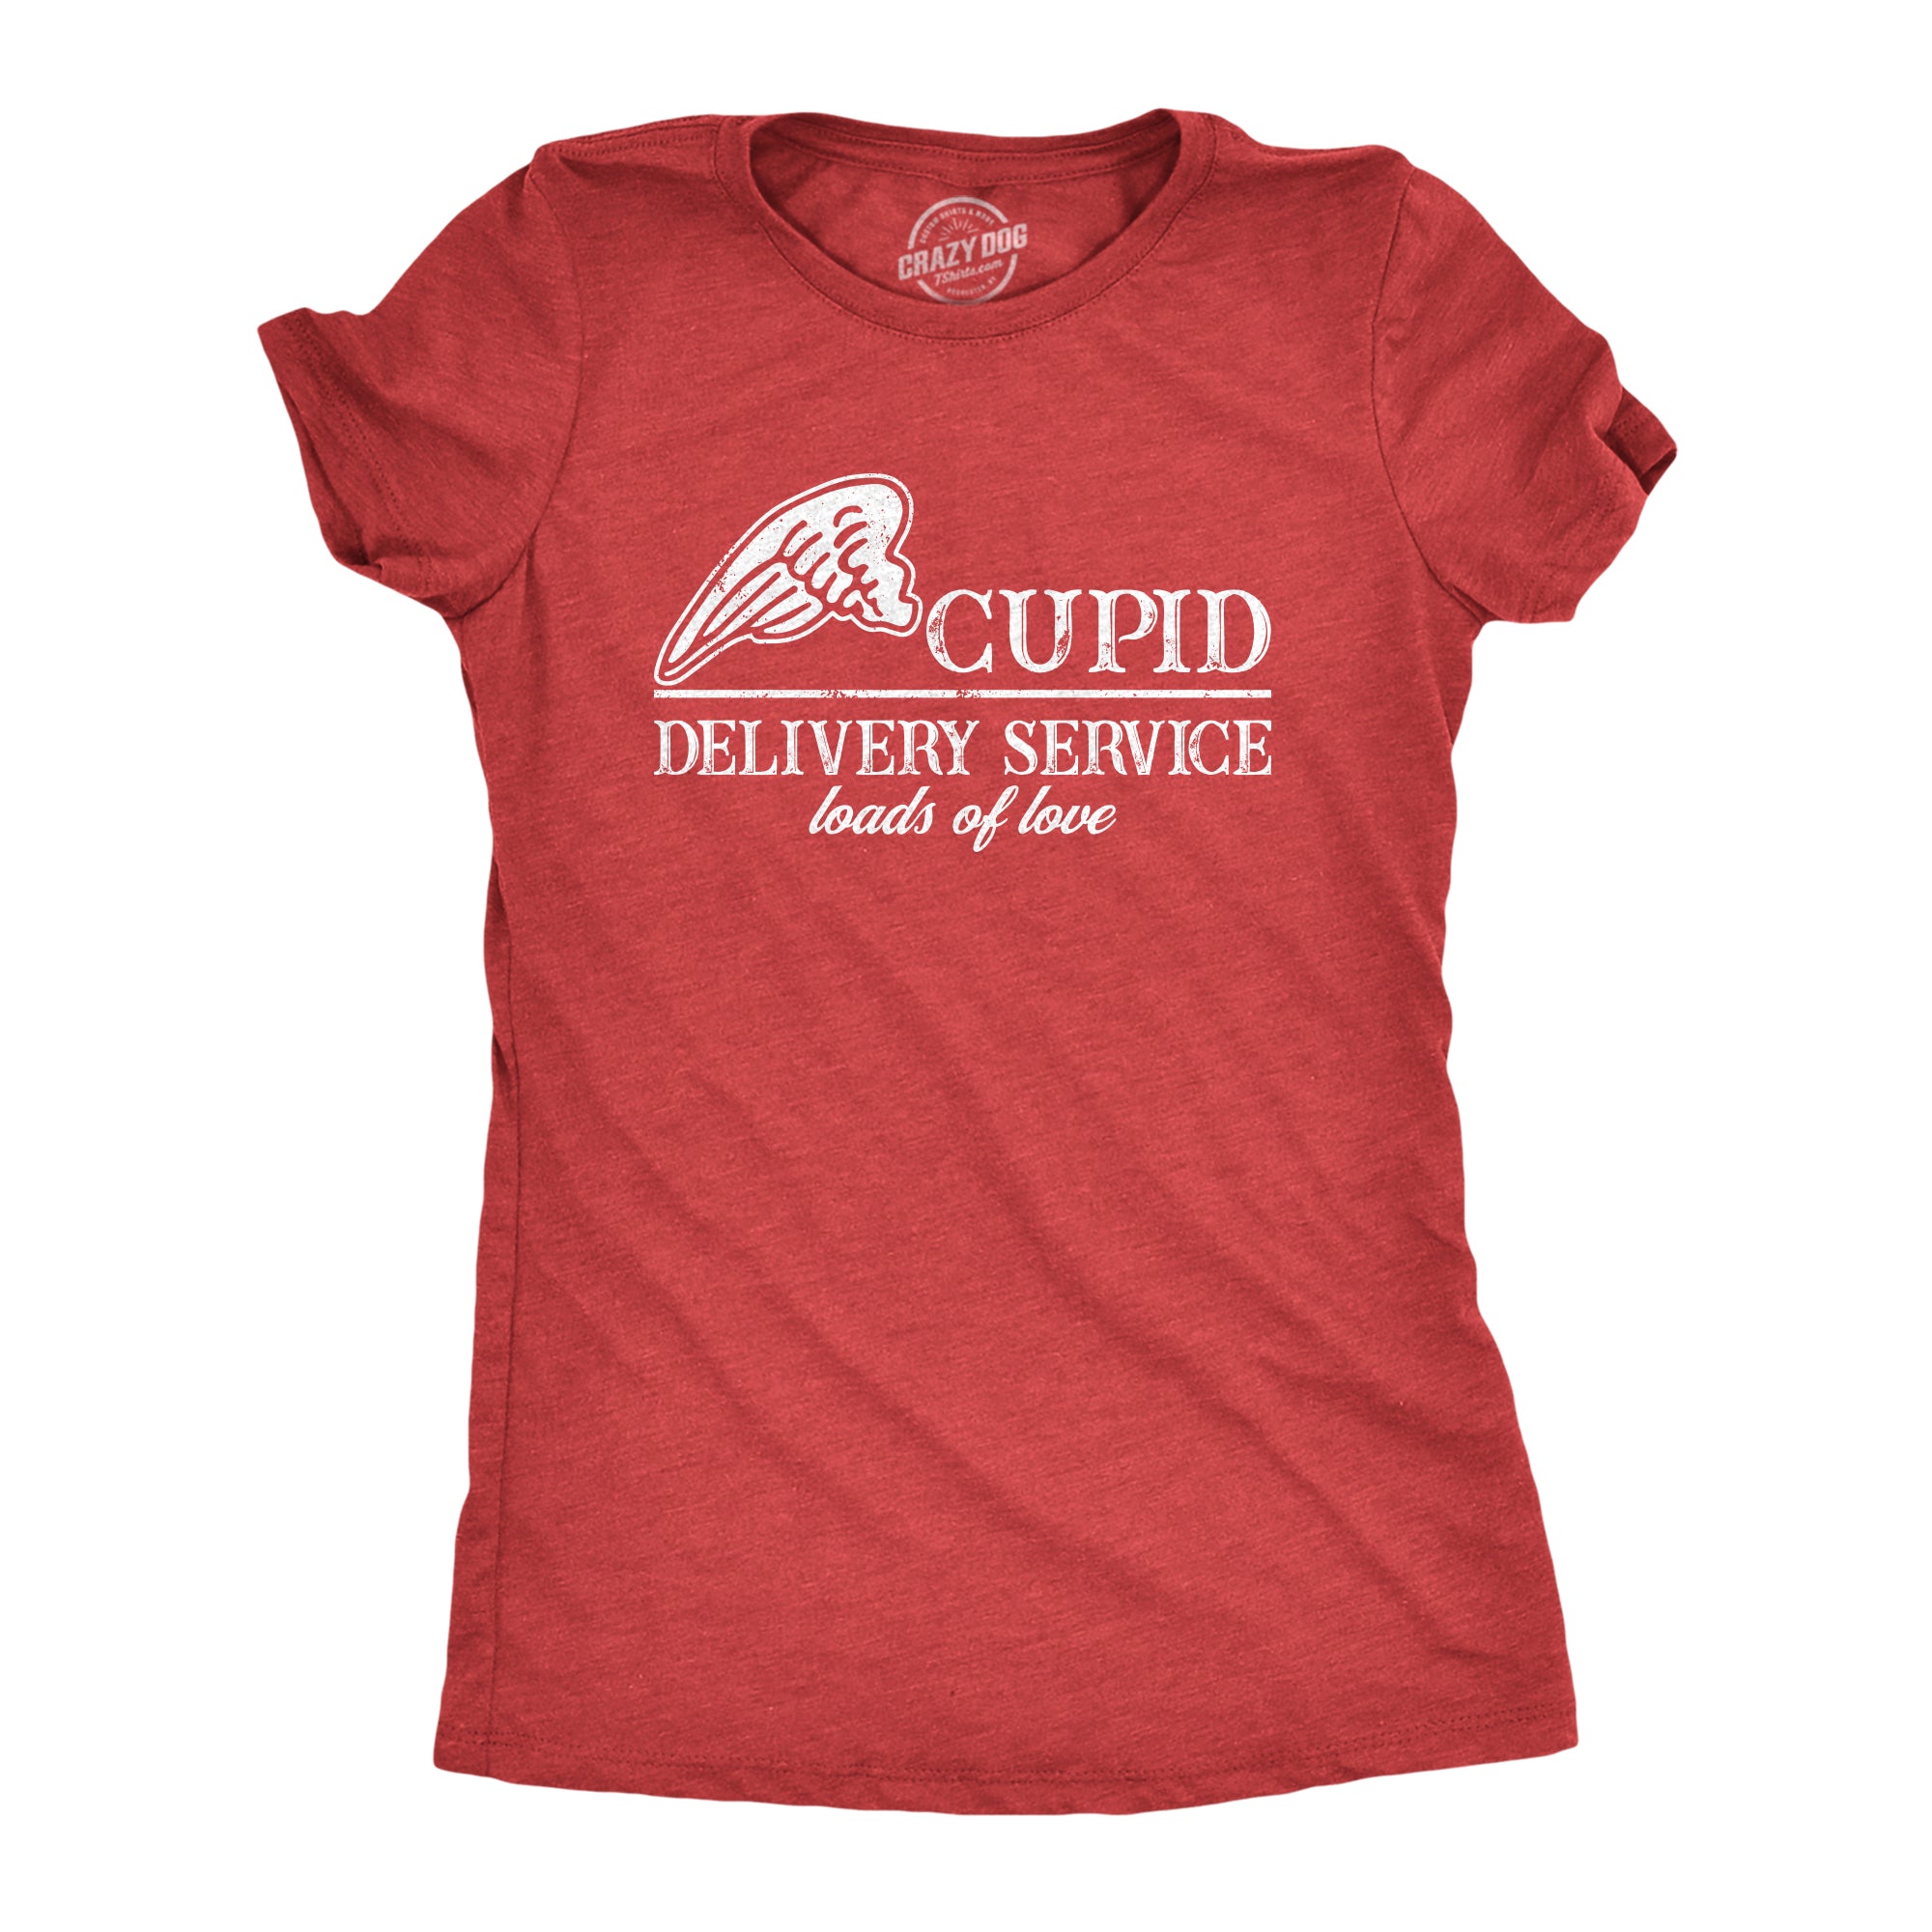 Funny Heather Red - DELIVERY Cupid Delivery Service Womens T Shirt Nerdy Valentine's Day Tee